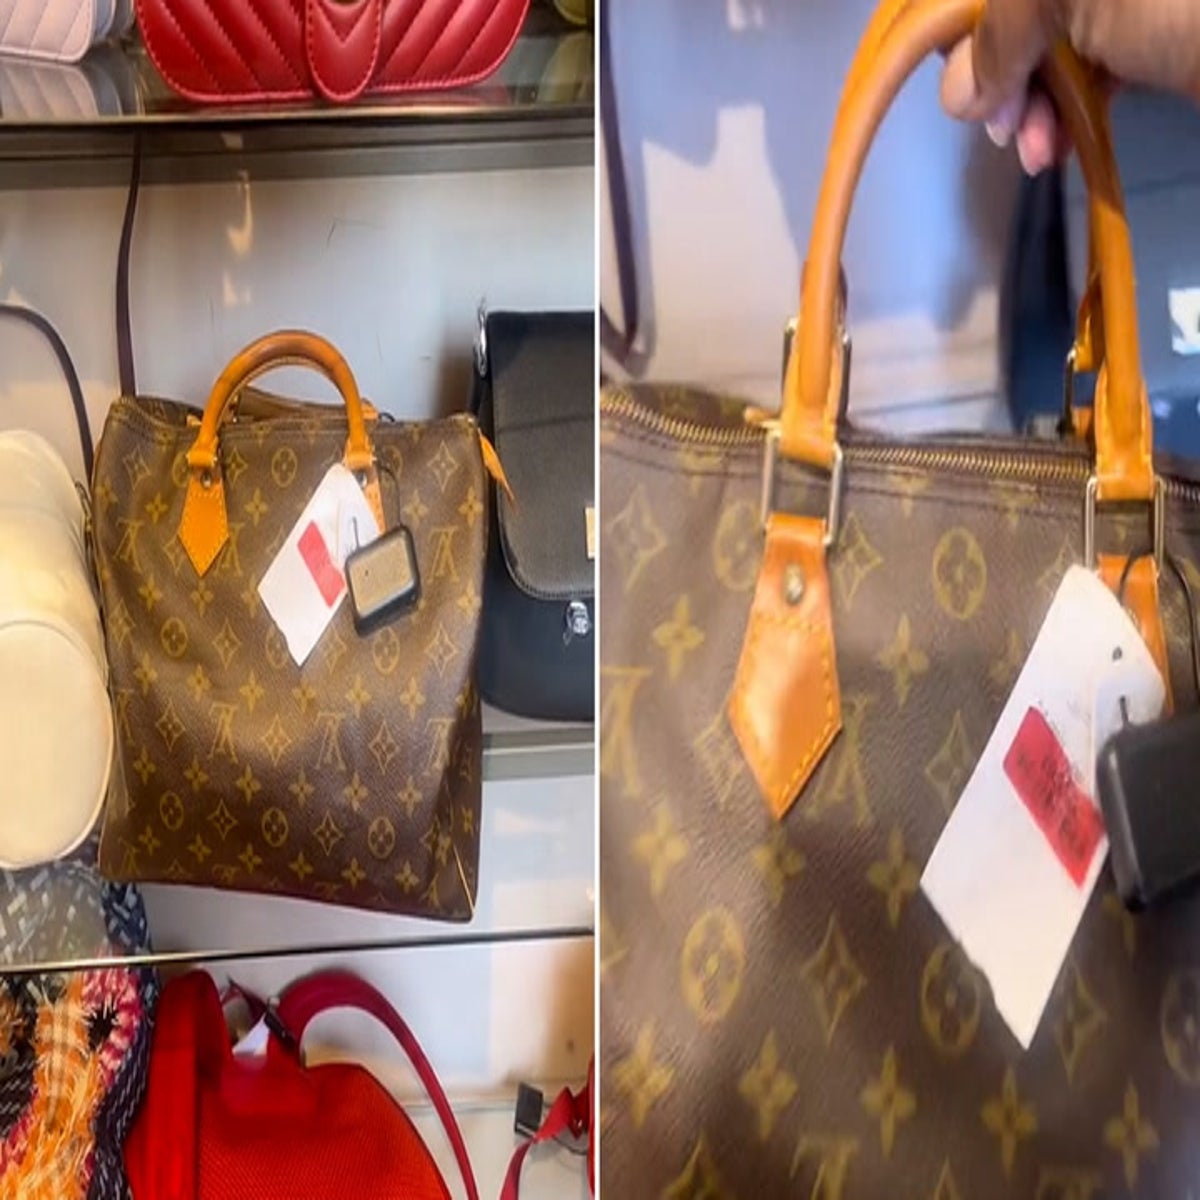 Shoppers stunned by price of Louis Vuitton bag in TK Maxx - Netmums Reviews